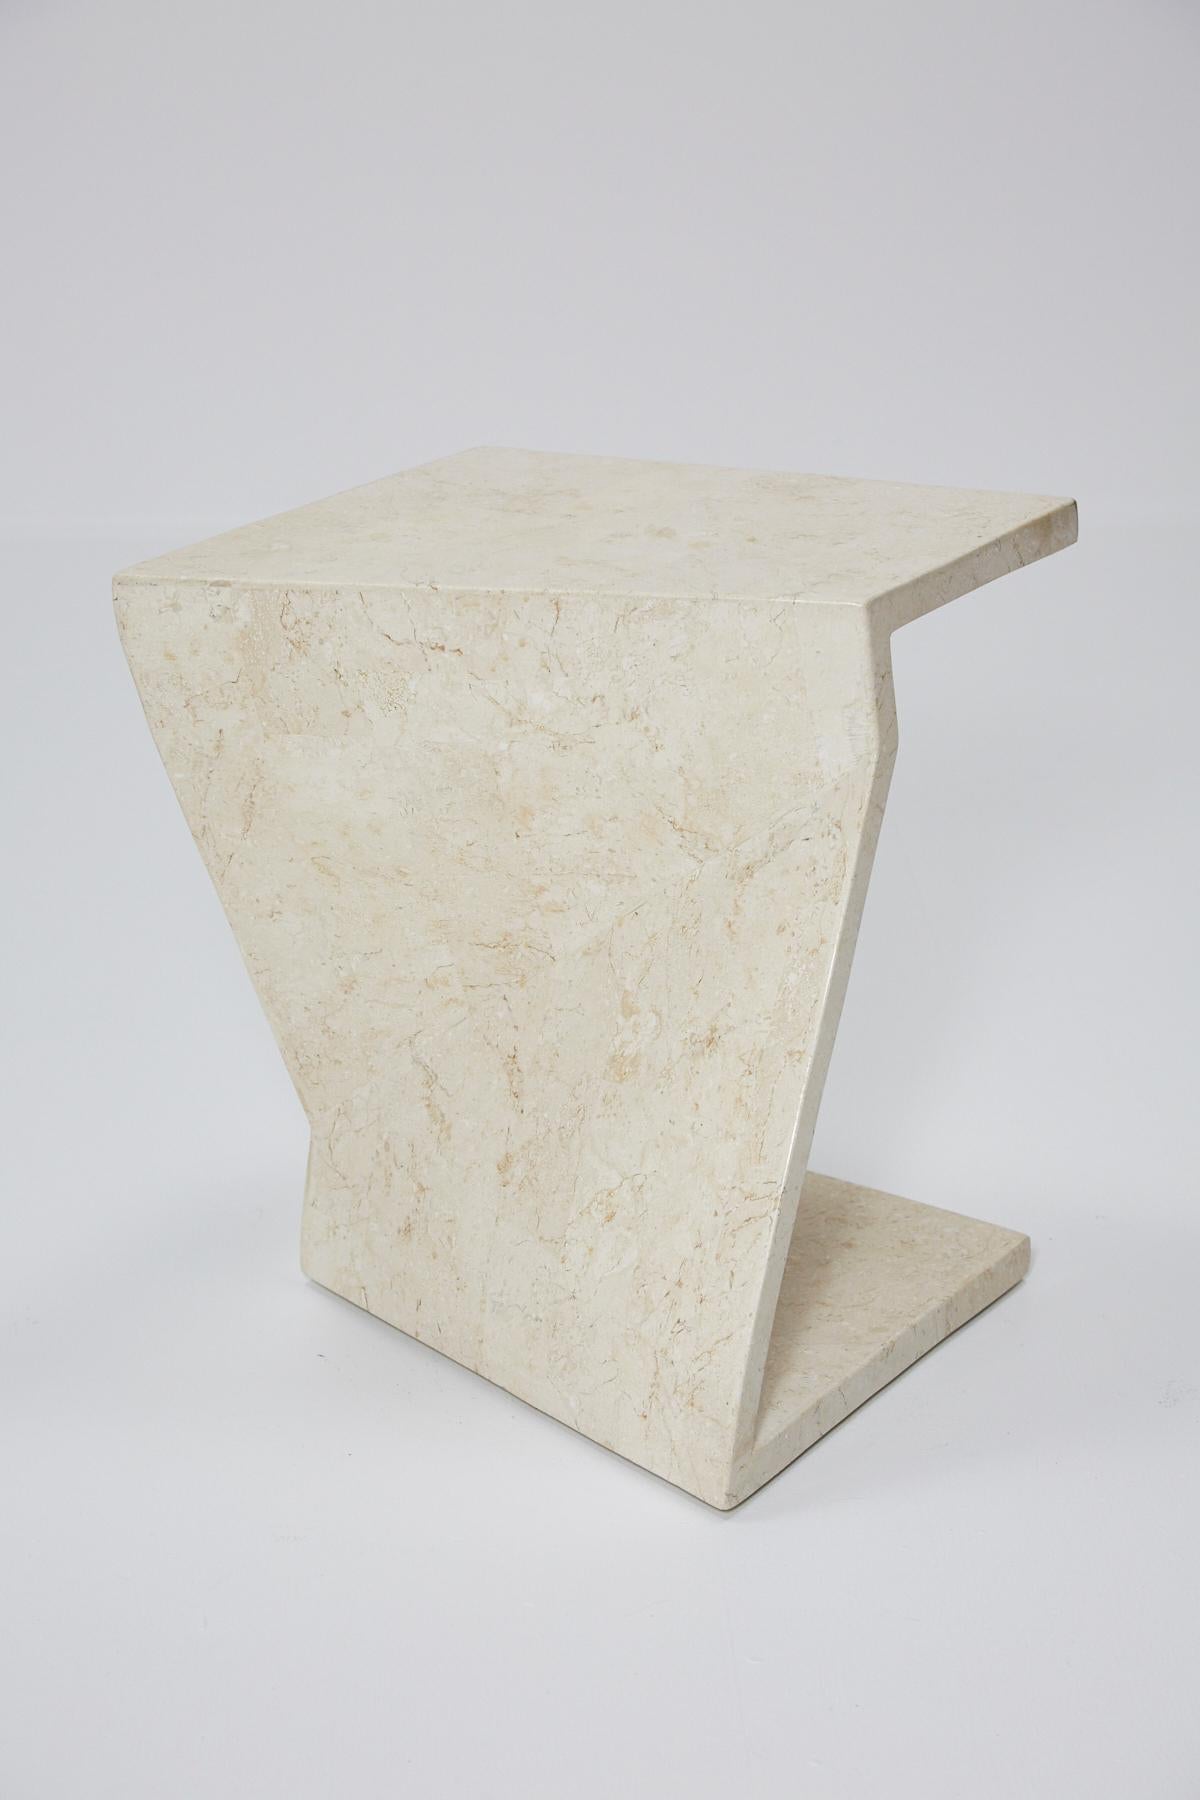 Post-Modern Zig Zag Side Tables or Coffee Table in Tessellated White Stone, 1990s